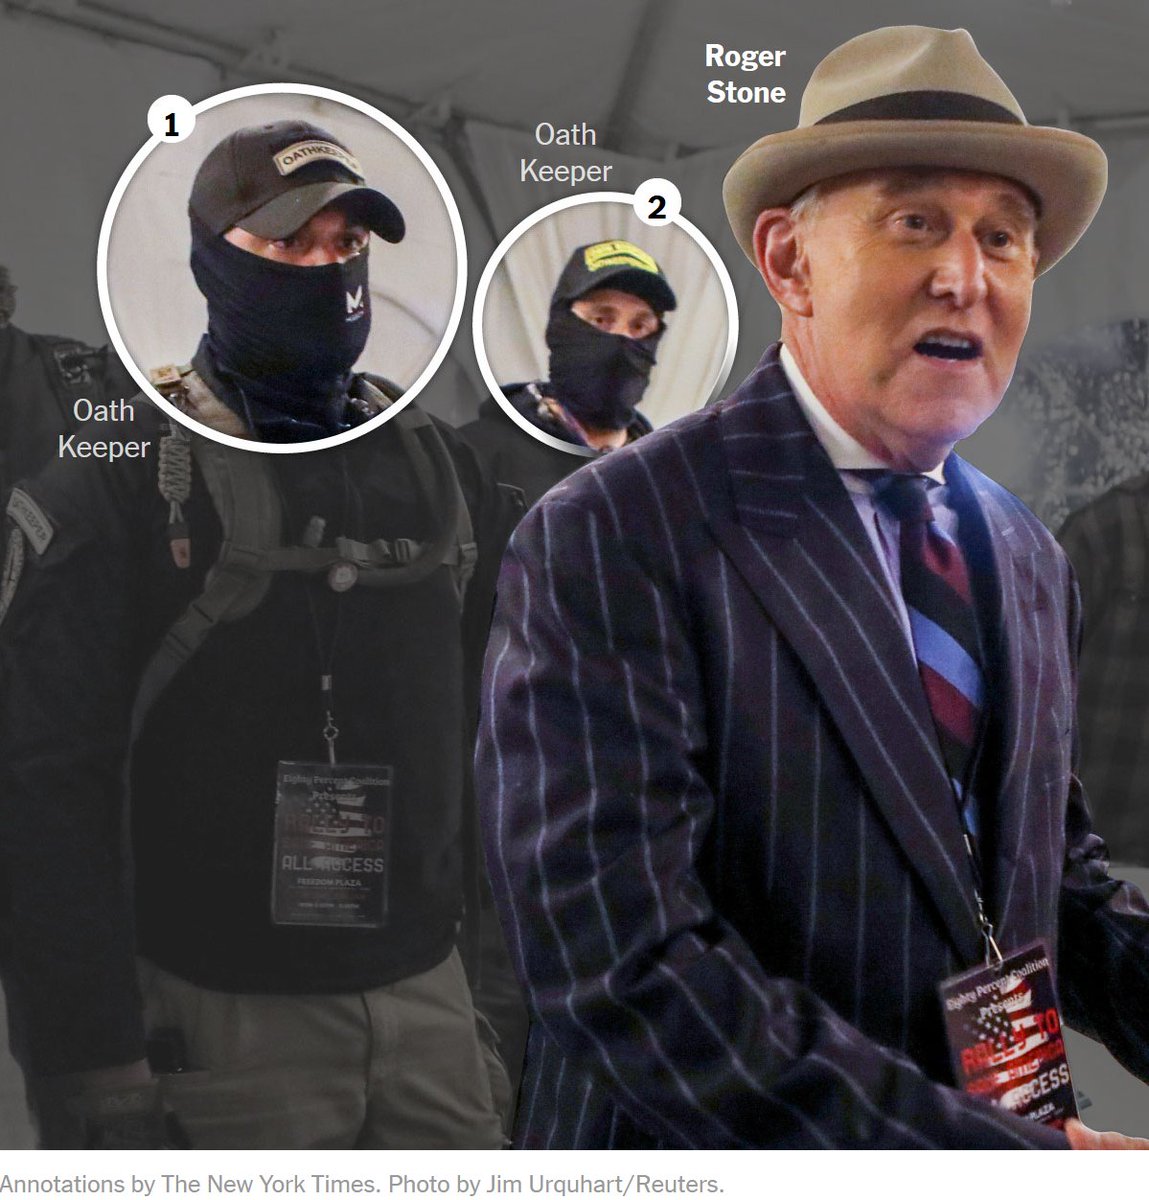  #CapitolBadge @CTExposers 4/ NYT drew on the work of the Capitol Terrorists Exposers group to trace Roger Stone's Oath Keepers security team: “At least six people who had provided security for Roger Stone entered the Capitol during the Jan. 6 attack.” https://www.nytimes.com/interactive/2021/02/14/us/roger-stone-capitol-riot.html